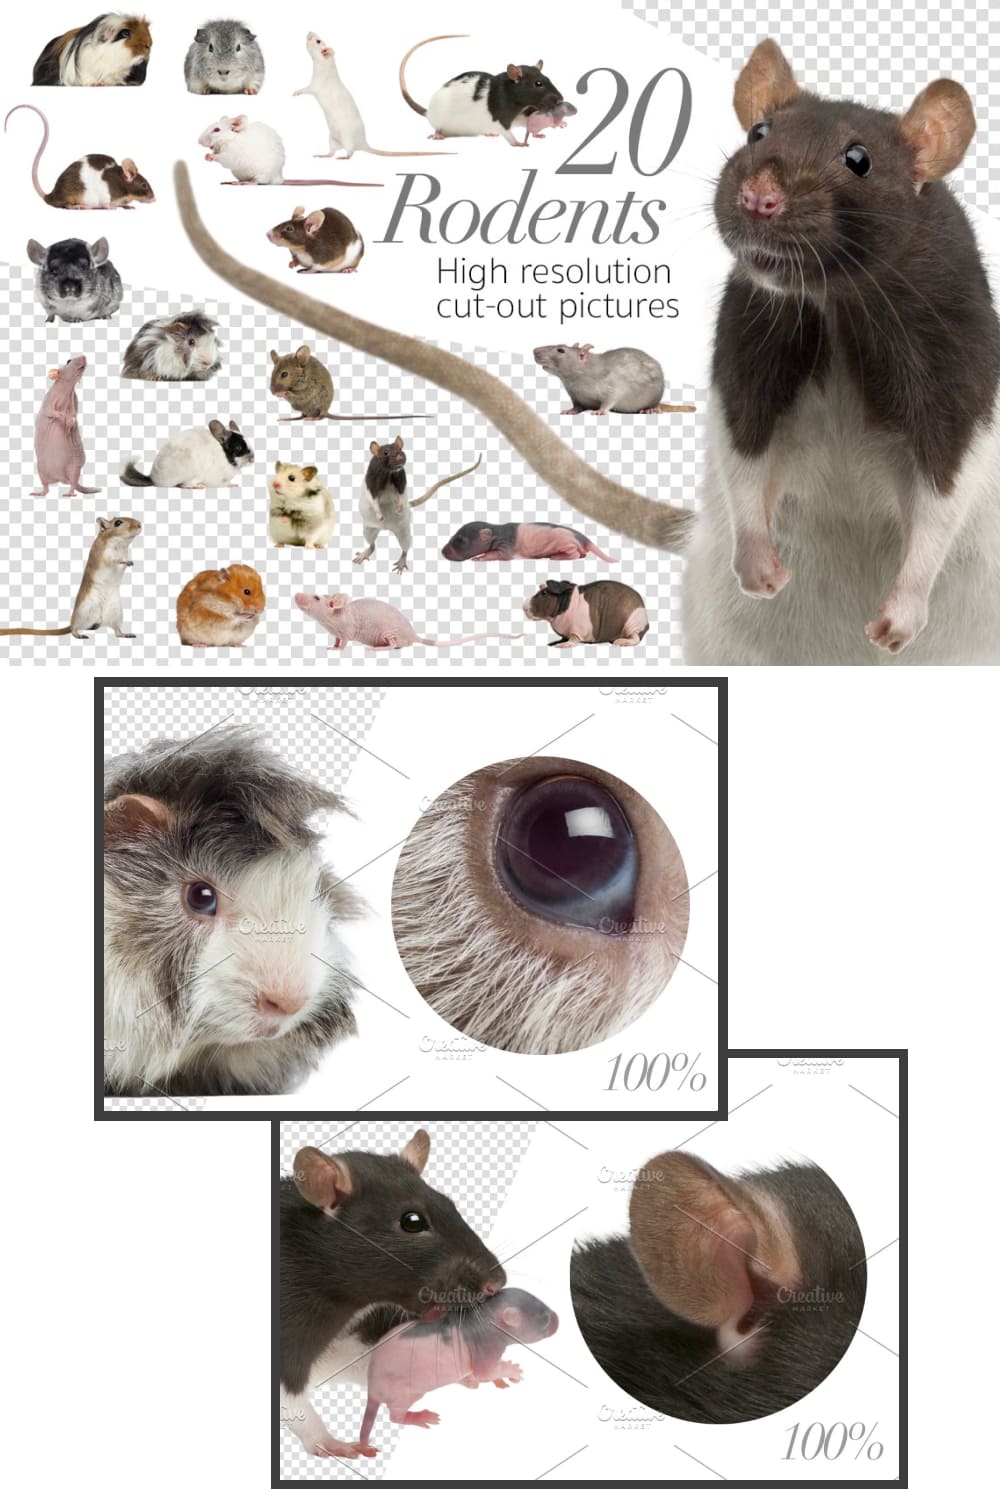 Rodents cut out pictures of pinterest.